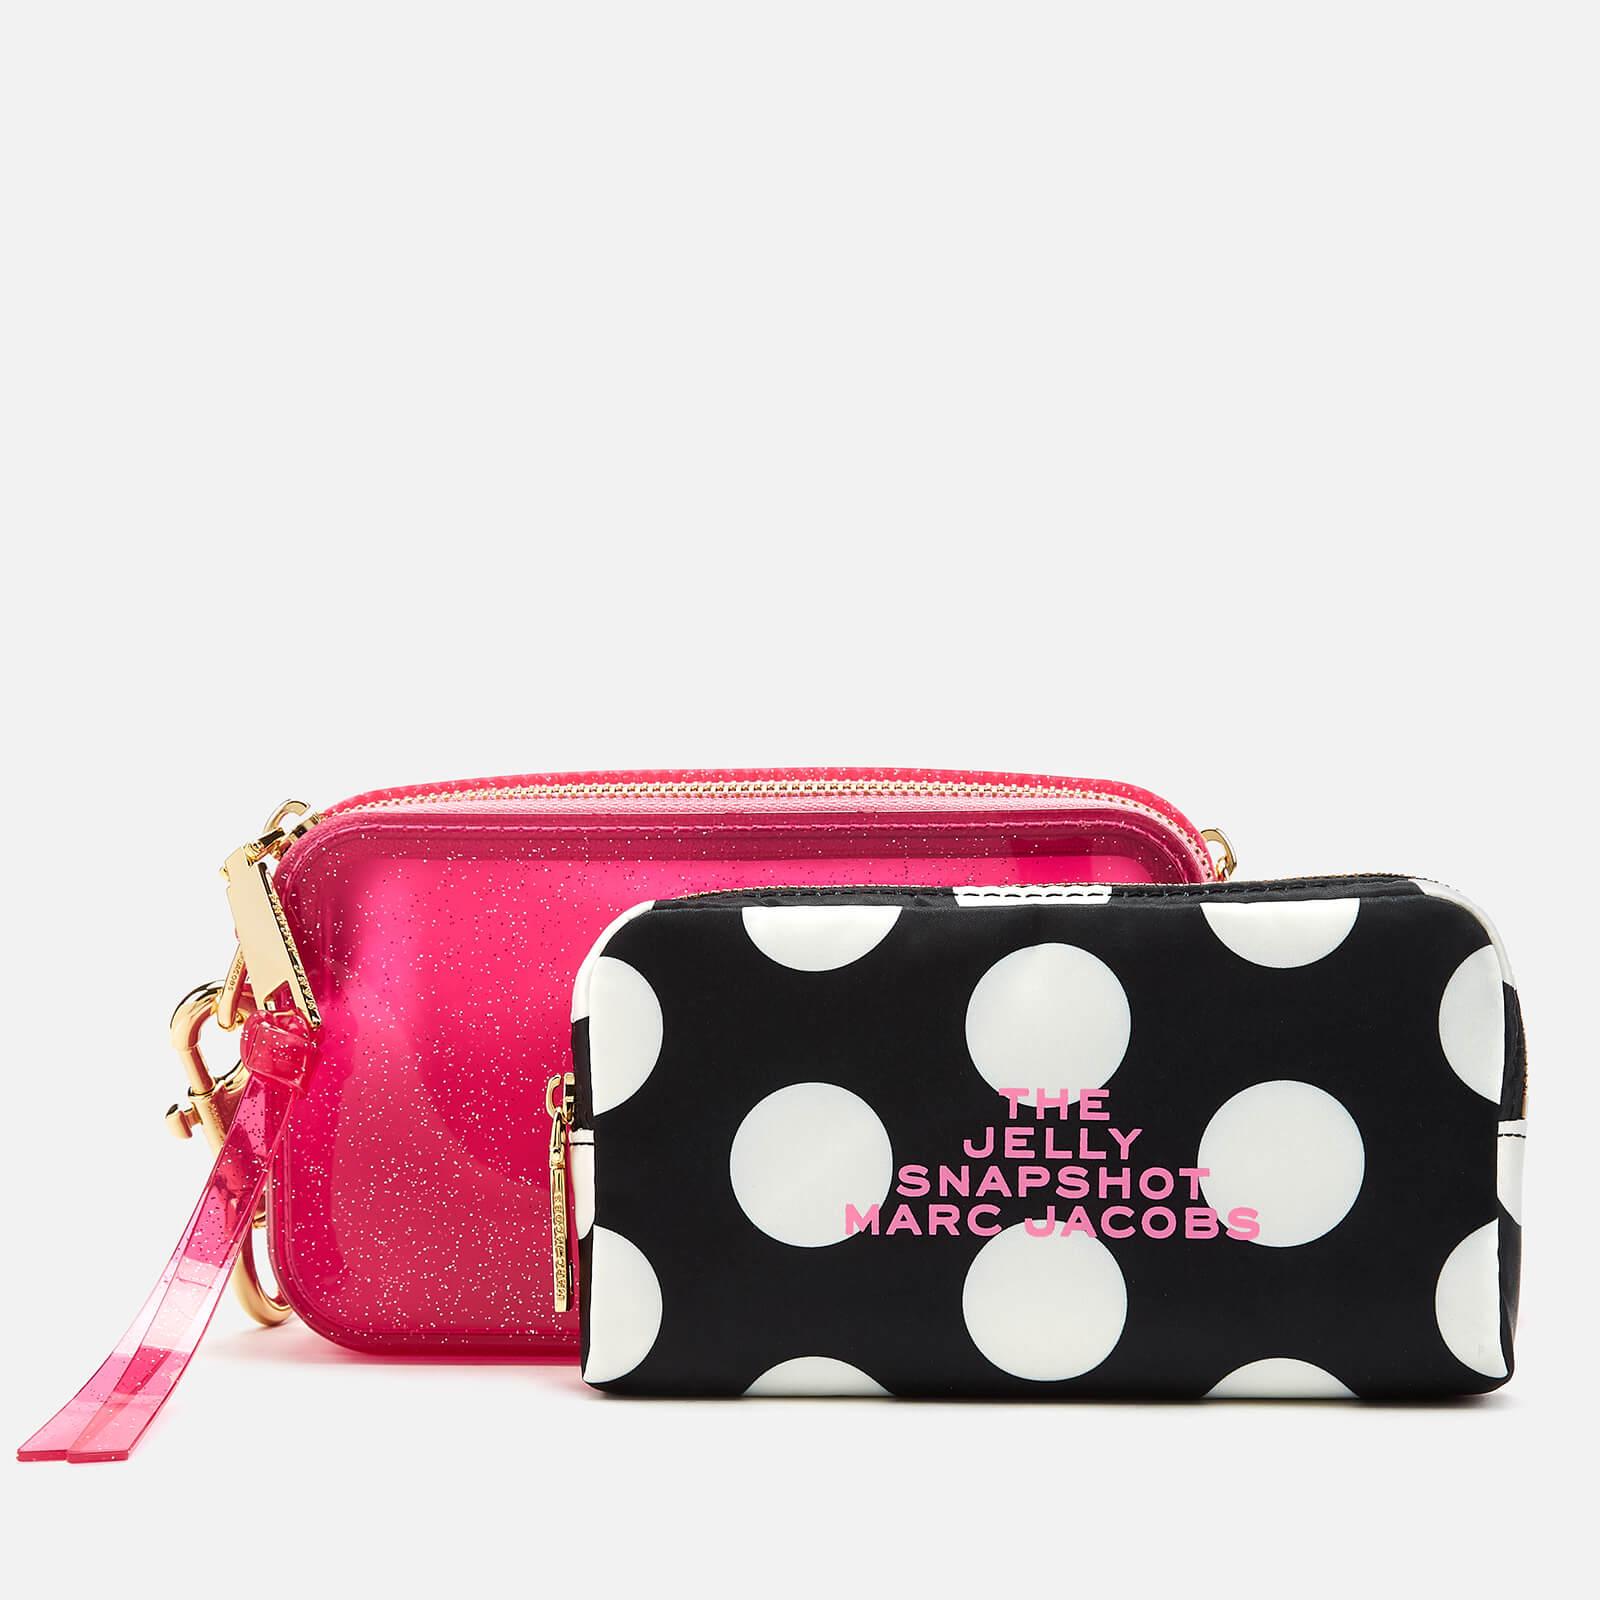 Marc Jacobs The Jelly Glitter Snapshot Bag in Pink - Lyst